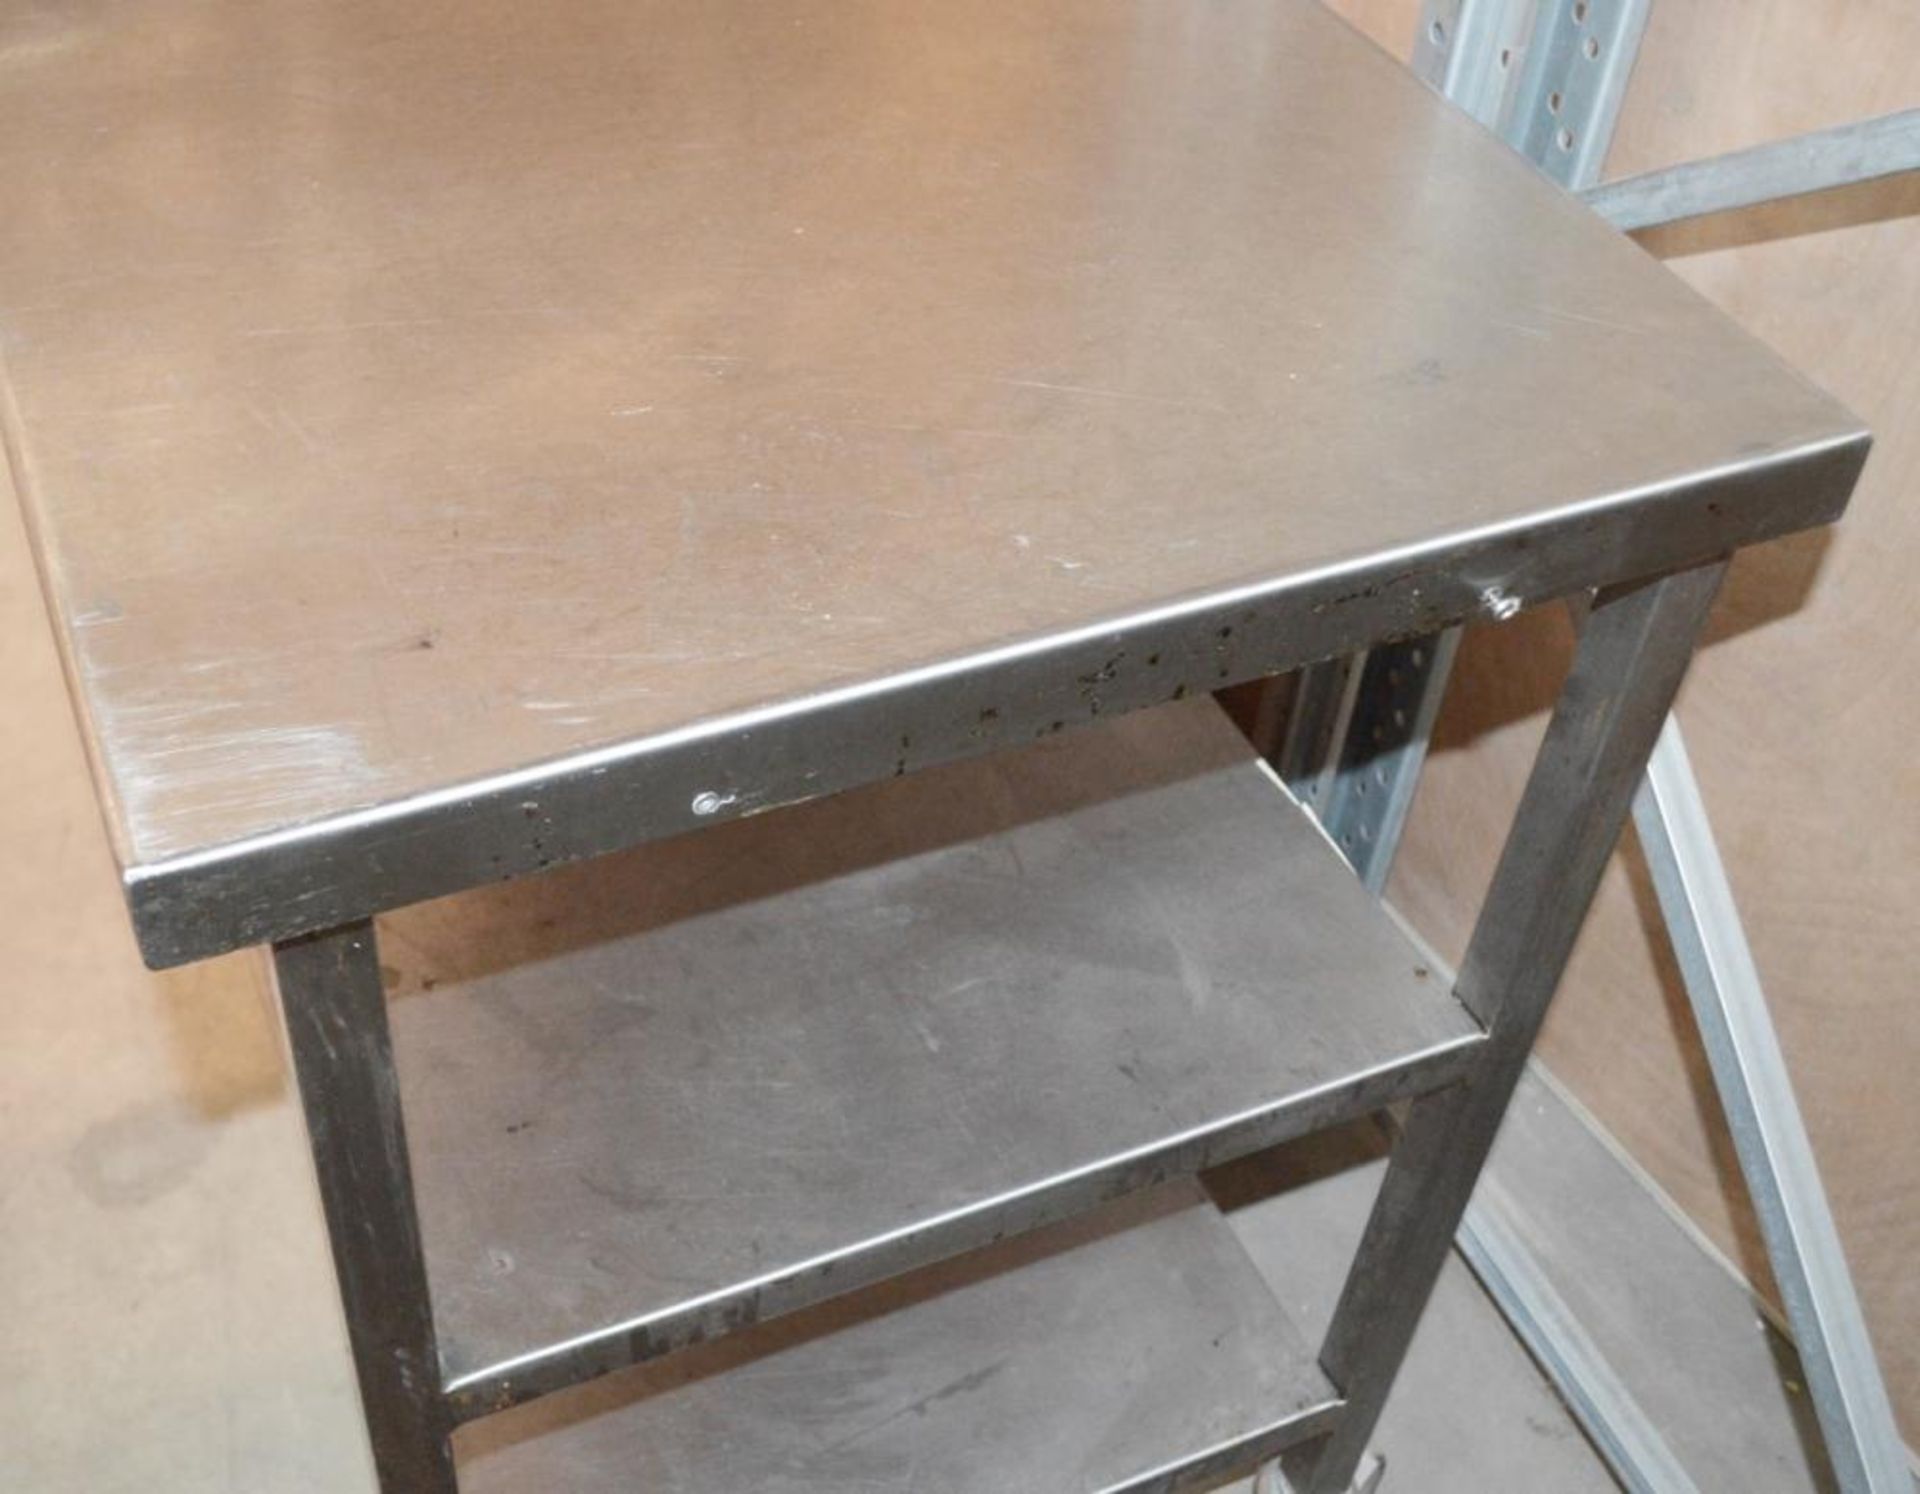 1 x Stainless Steel Commercial Kitchen Prep Table With Undershelves On Castors - Dimensions: W160 x - Image 3 of 3